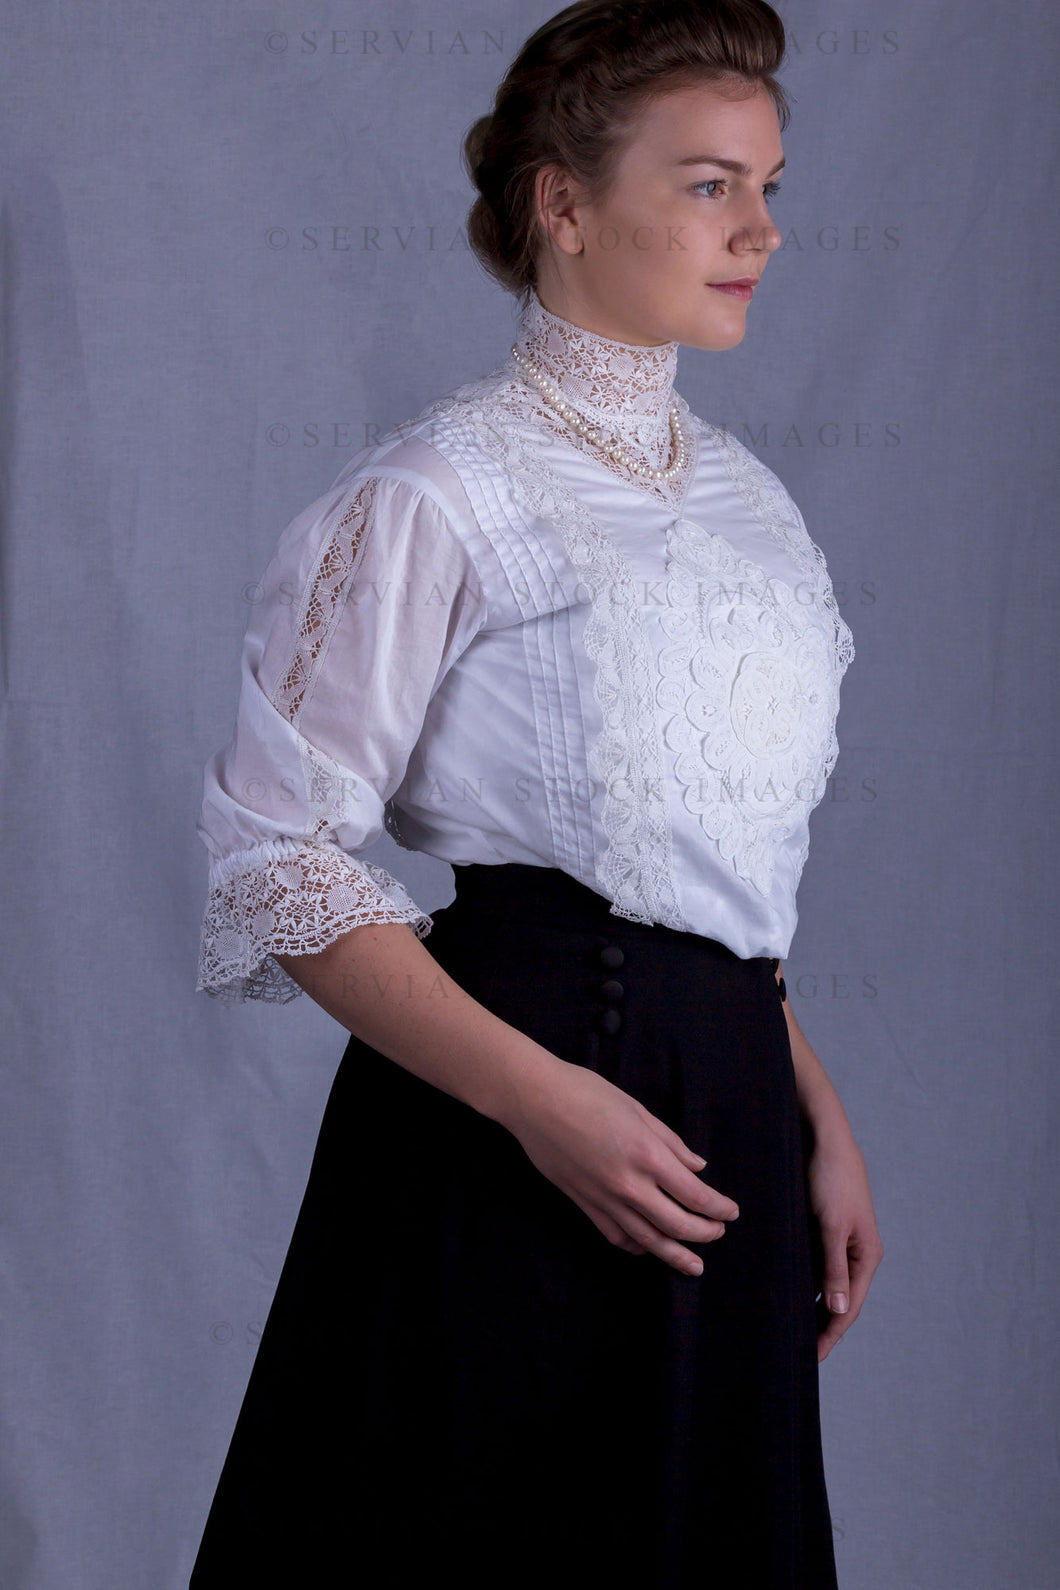 Edwardian woman in a white lace blouse and black skirt (Tayla 0139)